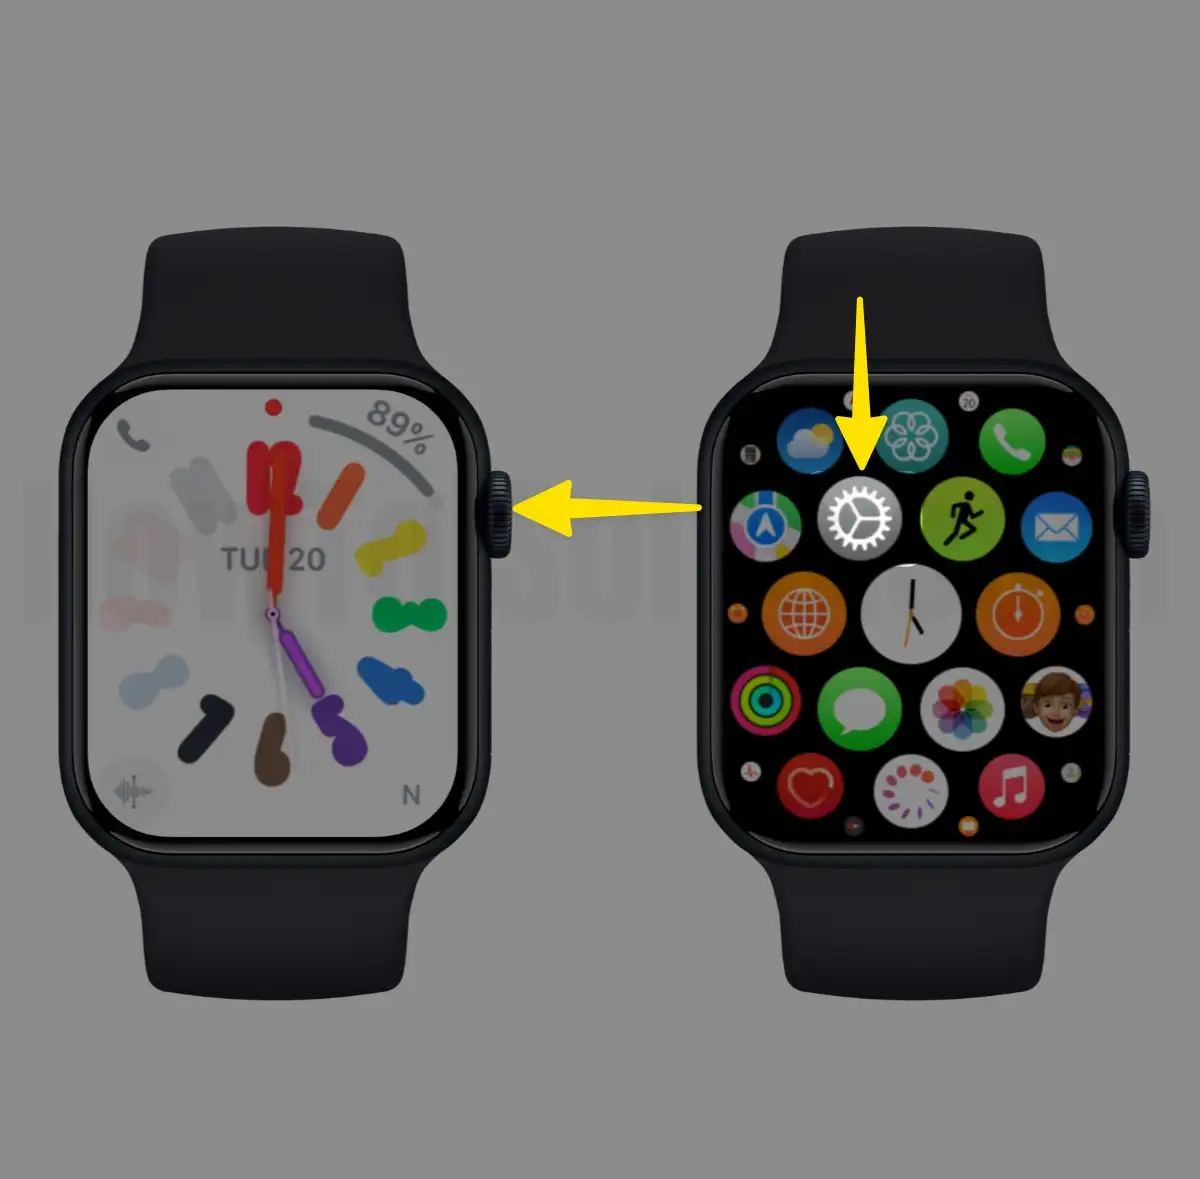 Open apple watch click button tap home screen settings on apple watch